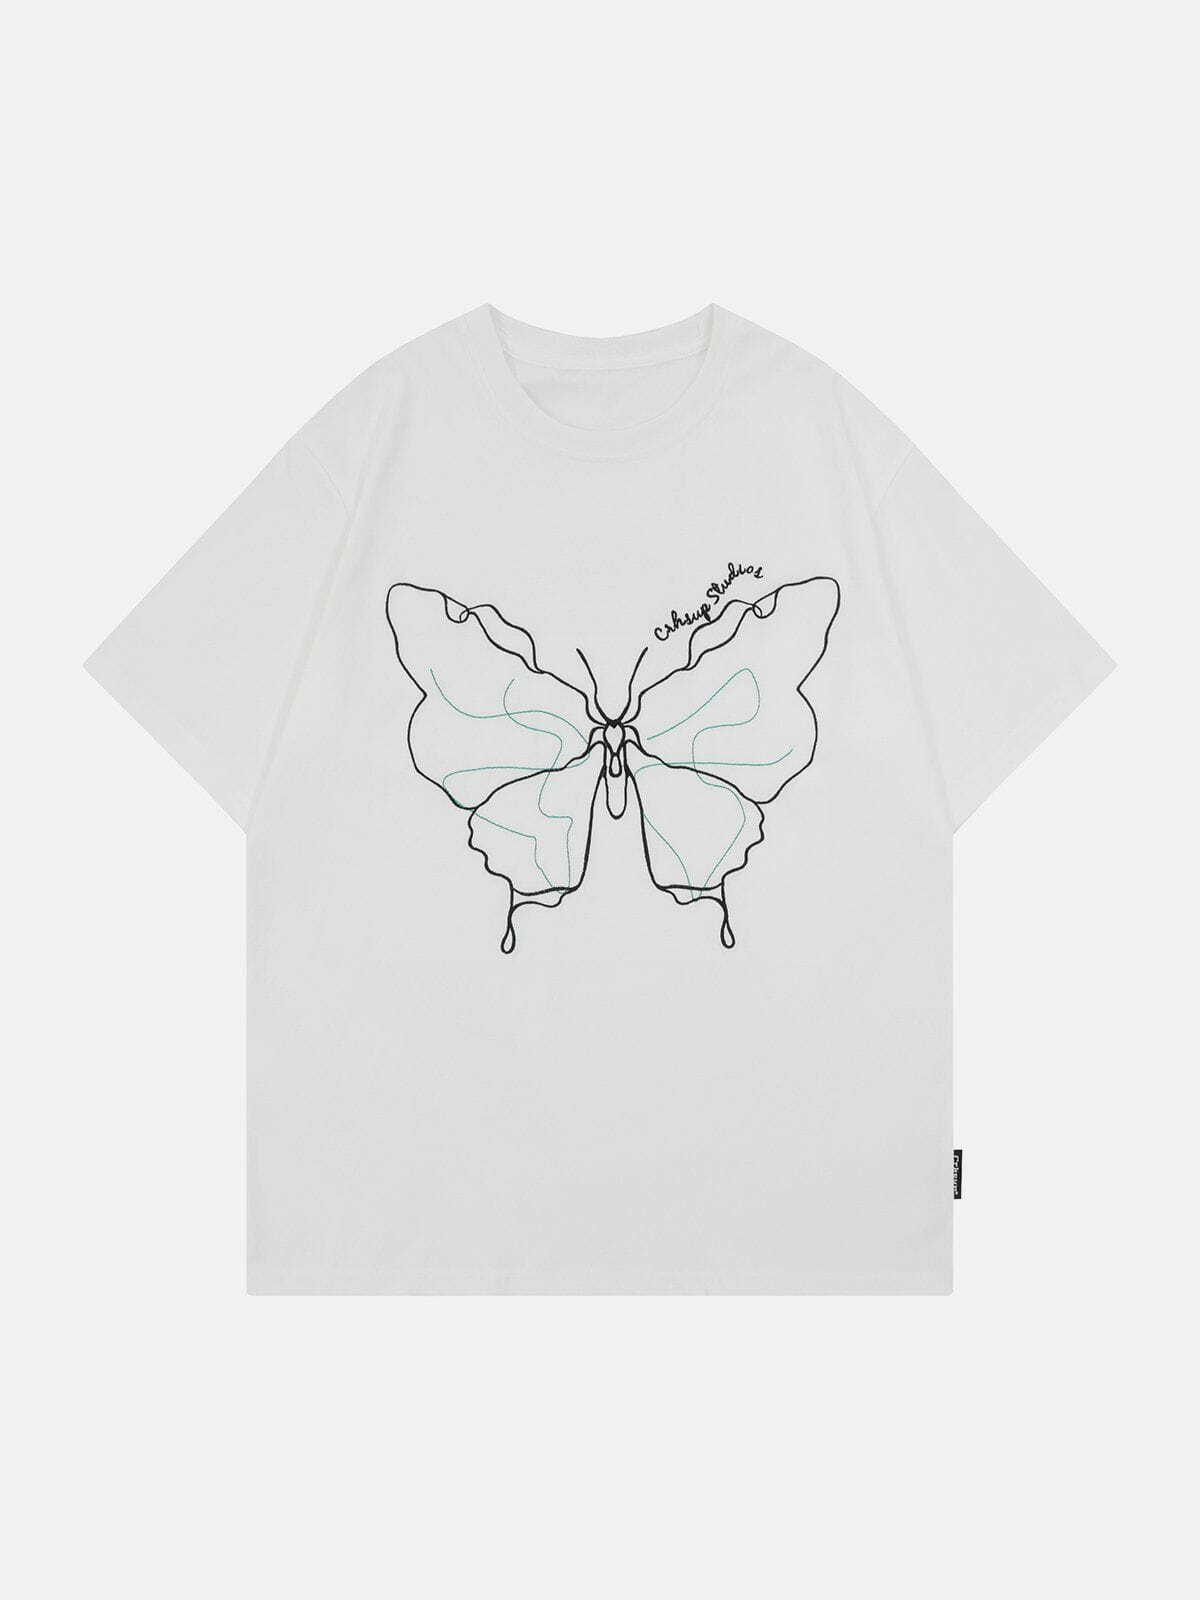 embroidered butterfly tee edgy retro streetwear shirt 1242